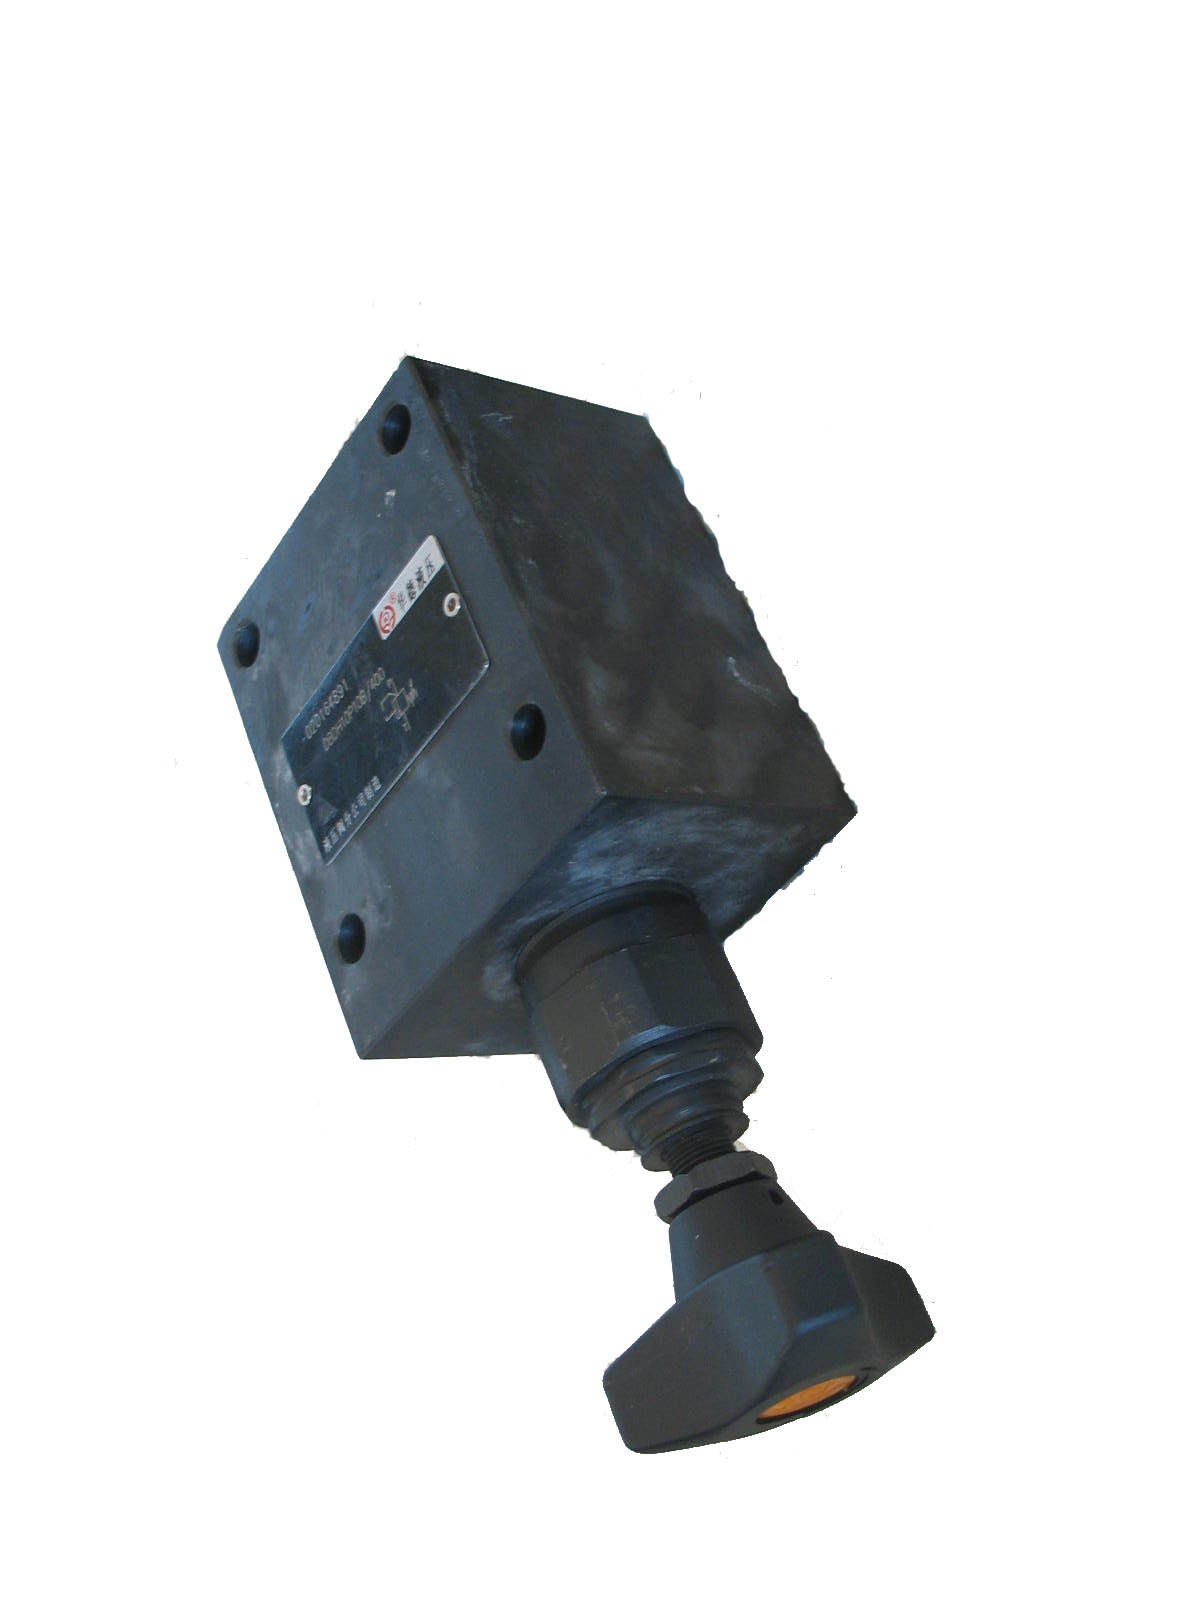 DBD Pressure Relief Valve Direct Operated Type 